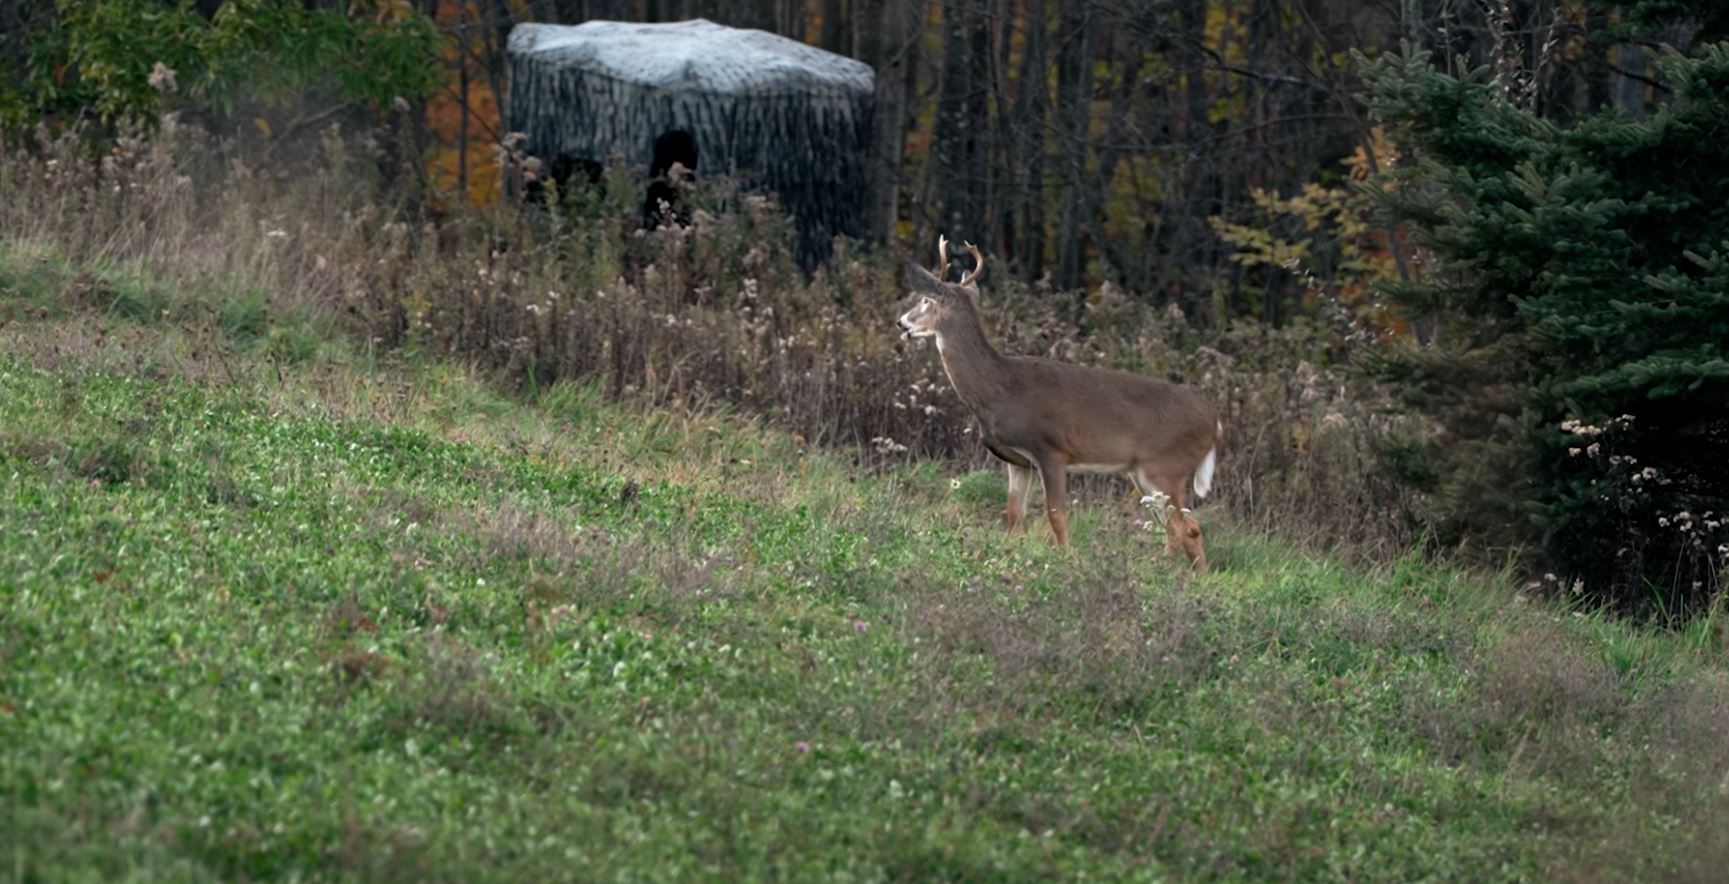 Can You Accurately Age a Deer in the Field? Find out with NDA's Quiz!